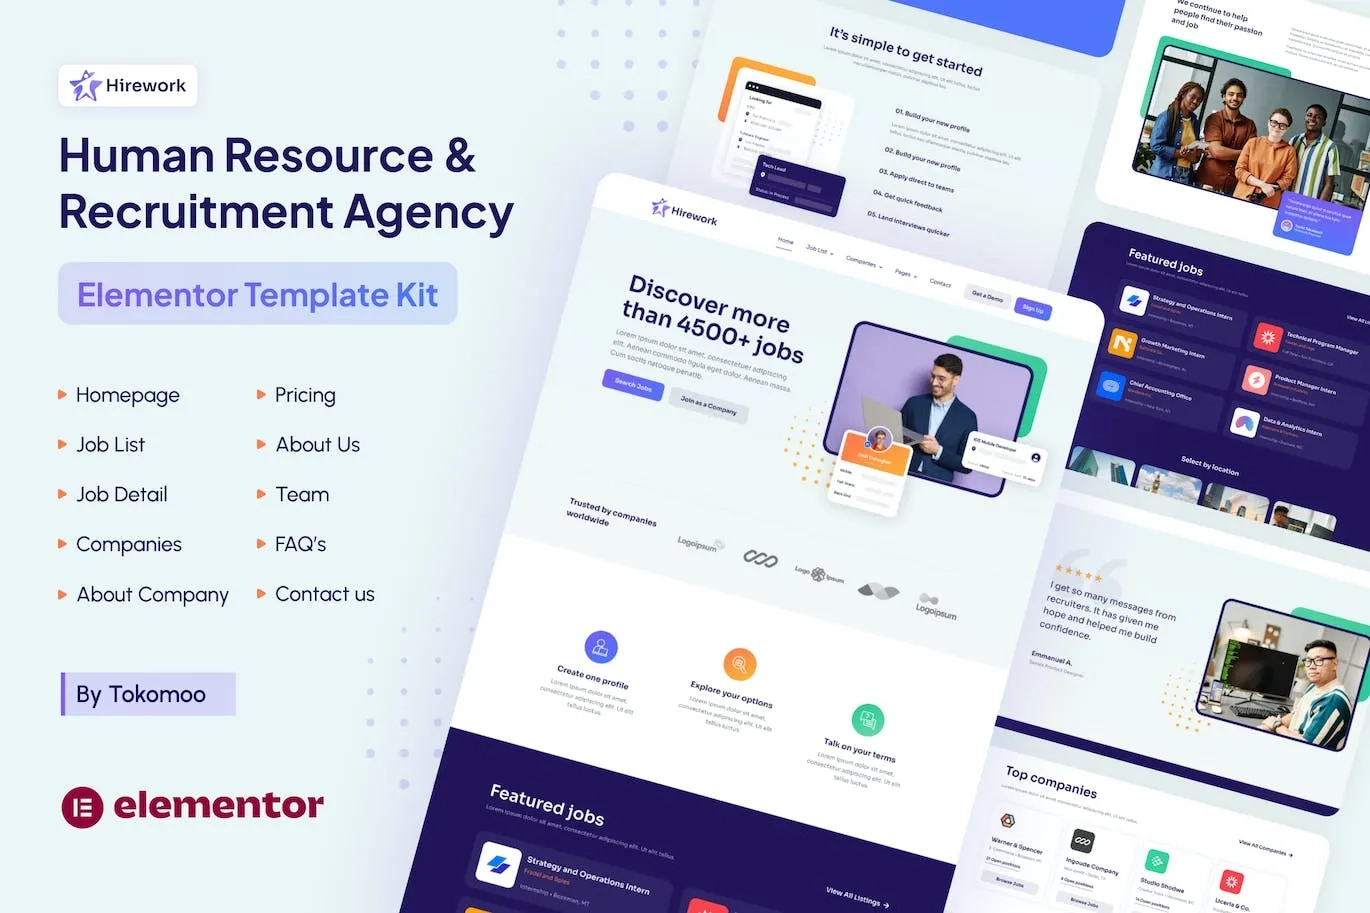 Hirework Human Resource And Recruitment Agency Elementor Pro Template Kit 3 1696846753 1